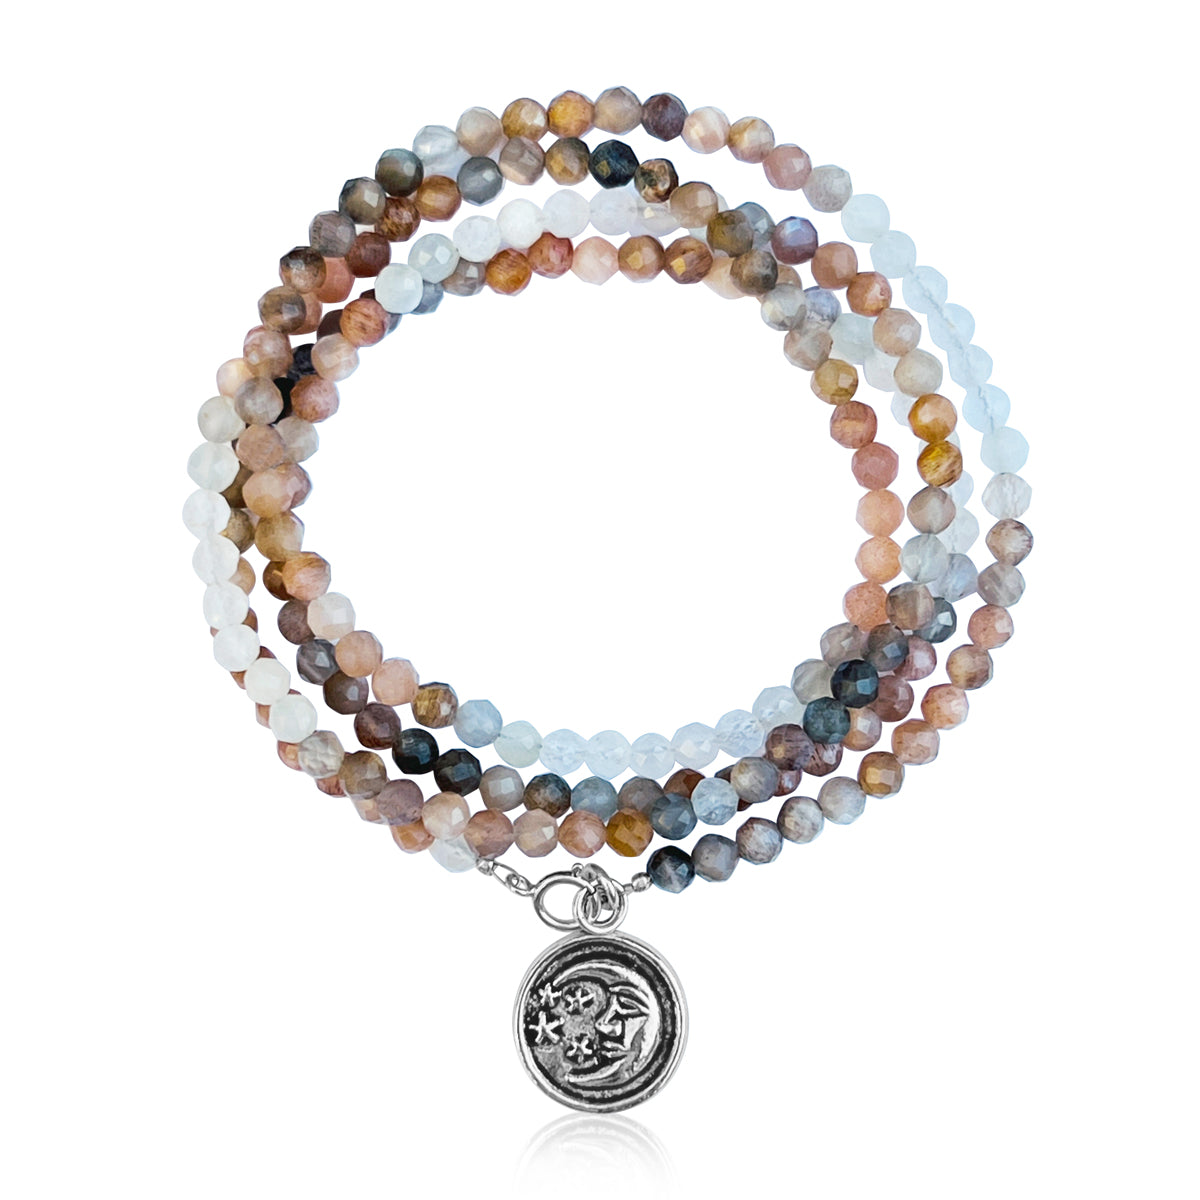 The Sun and Moon in Balance Wrap Bracelet. The Sun emerges the constant, Masculine, Original Source of Mind and Spirit from which all life emanates. The Moon is an expression of the reflection of Mother Earth and feminine nature. They need each other to be in balance, much like Yin and Yang.